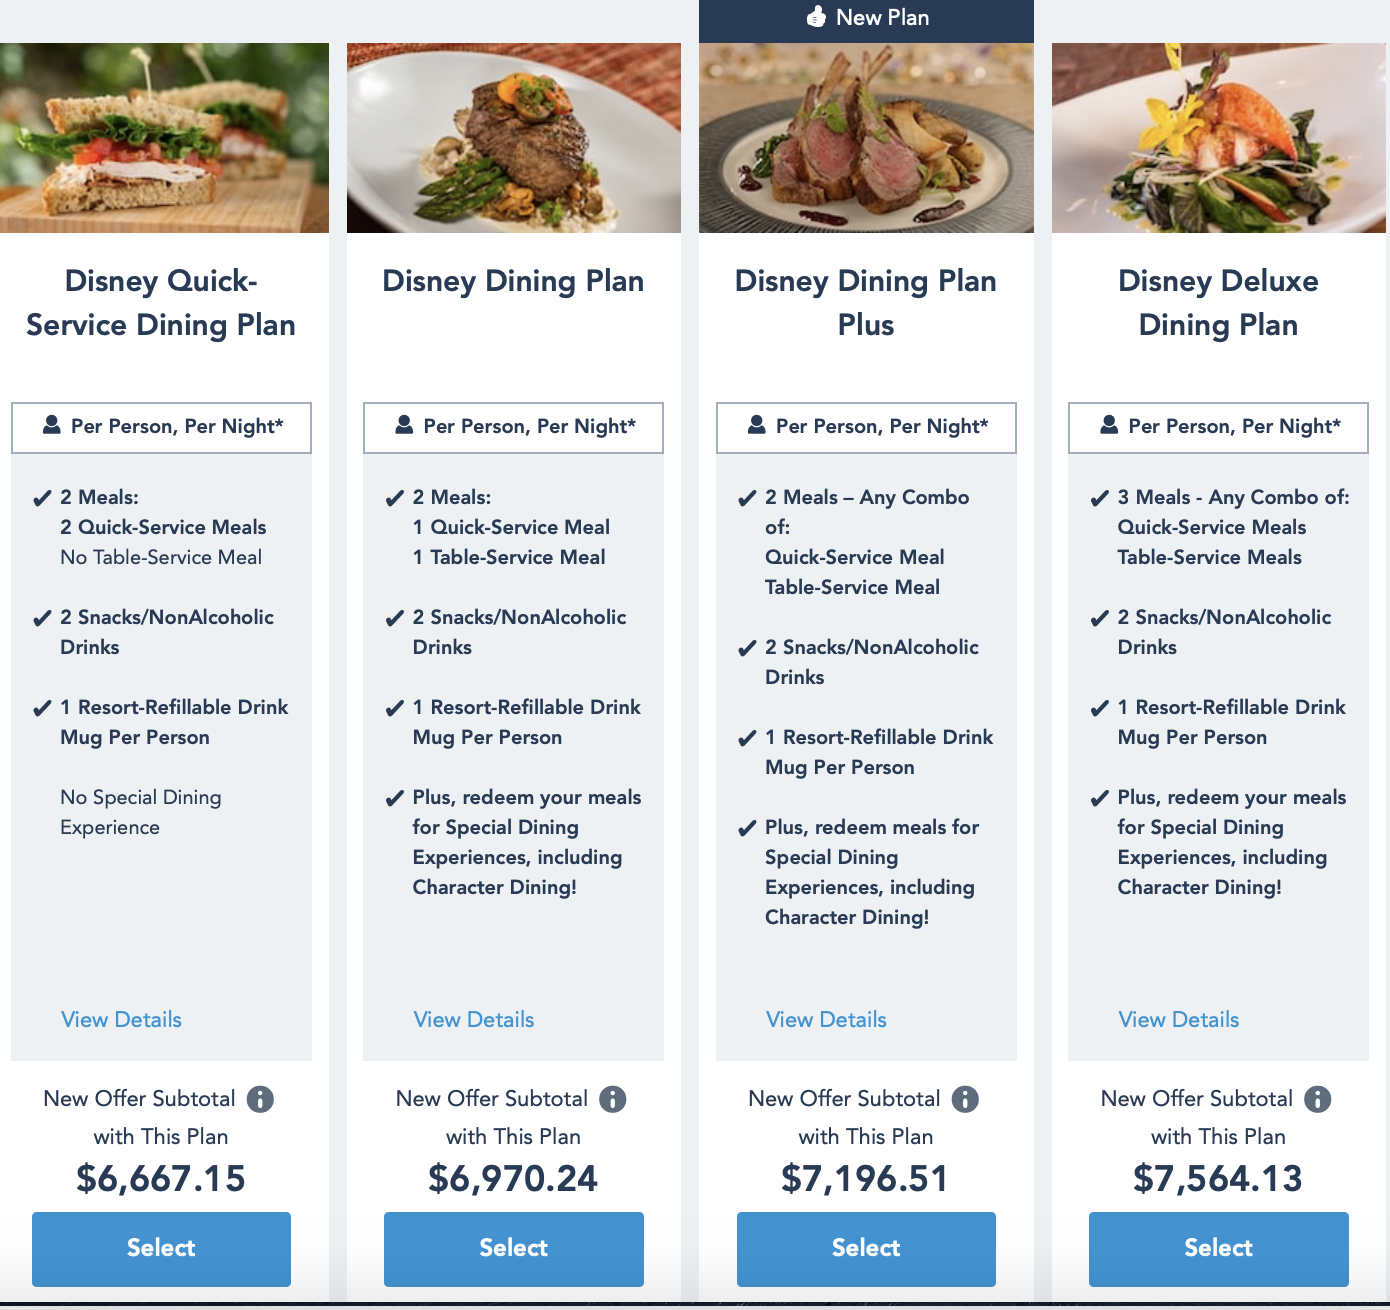 Is The Dining Plan Available At Disney Image to u